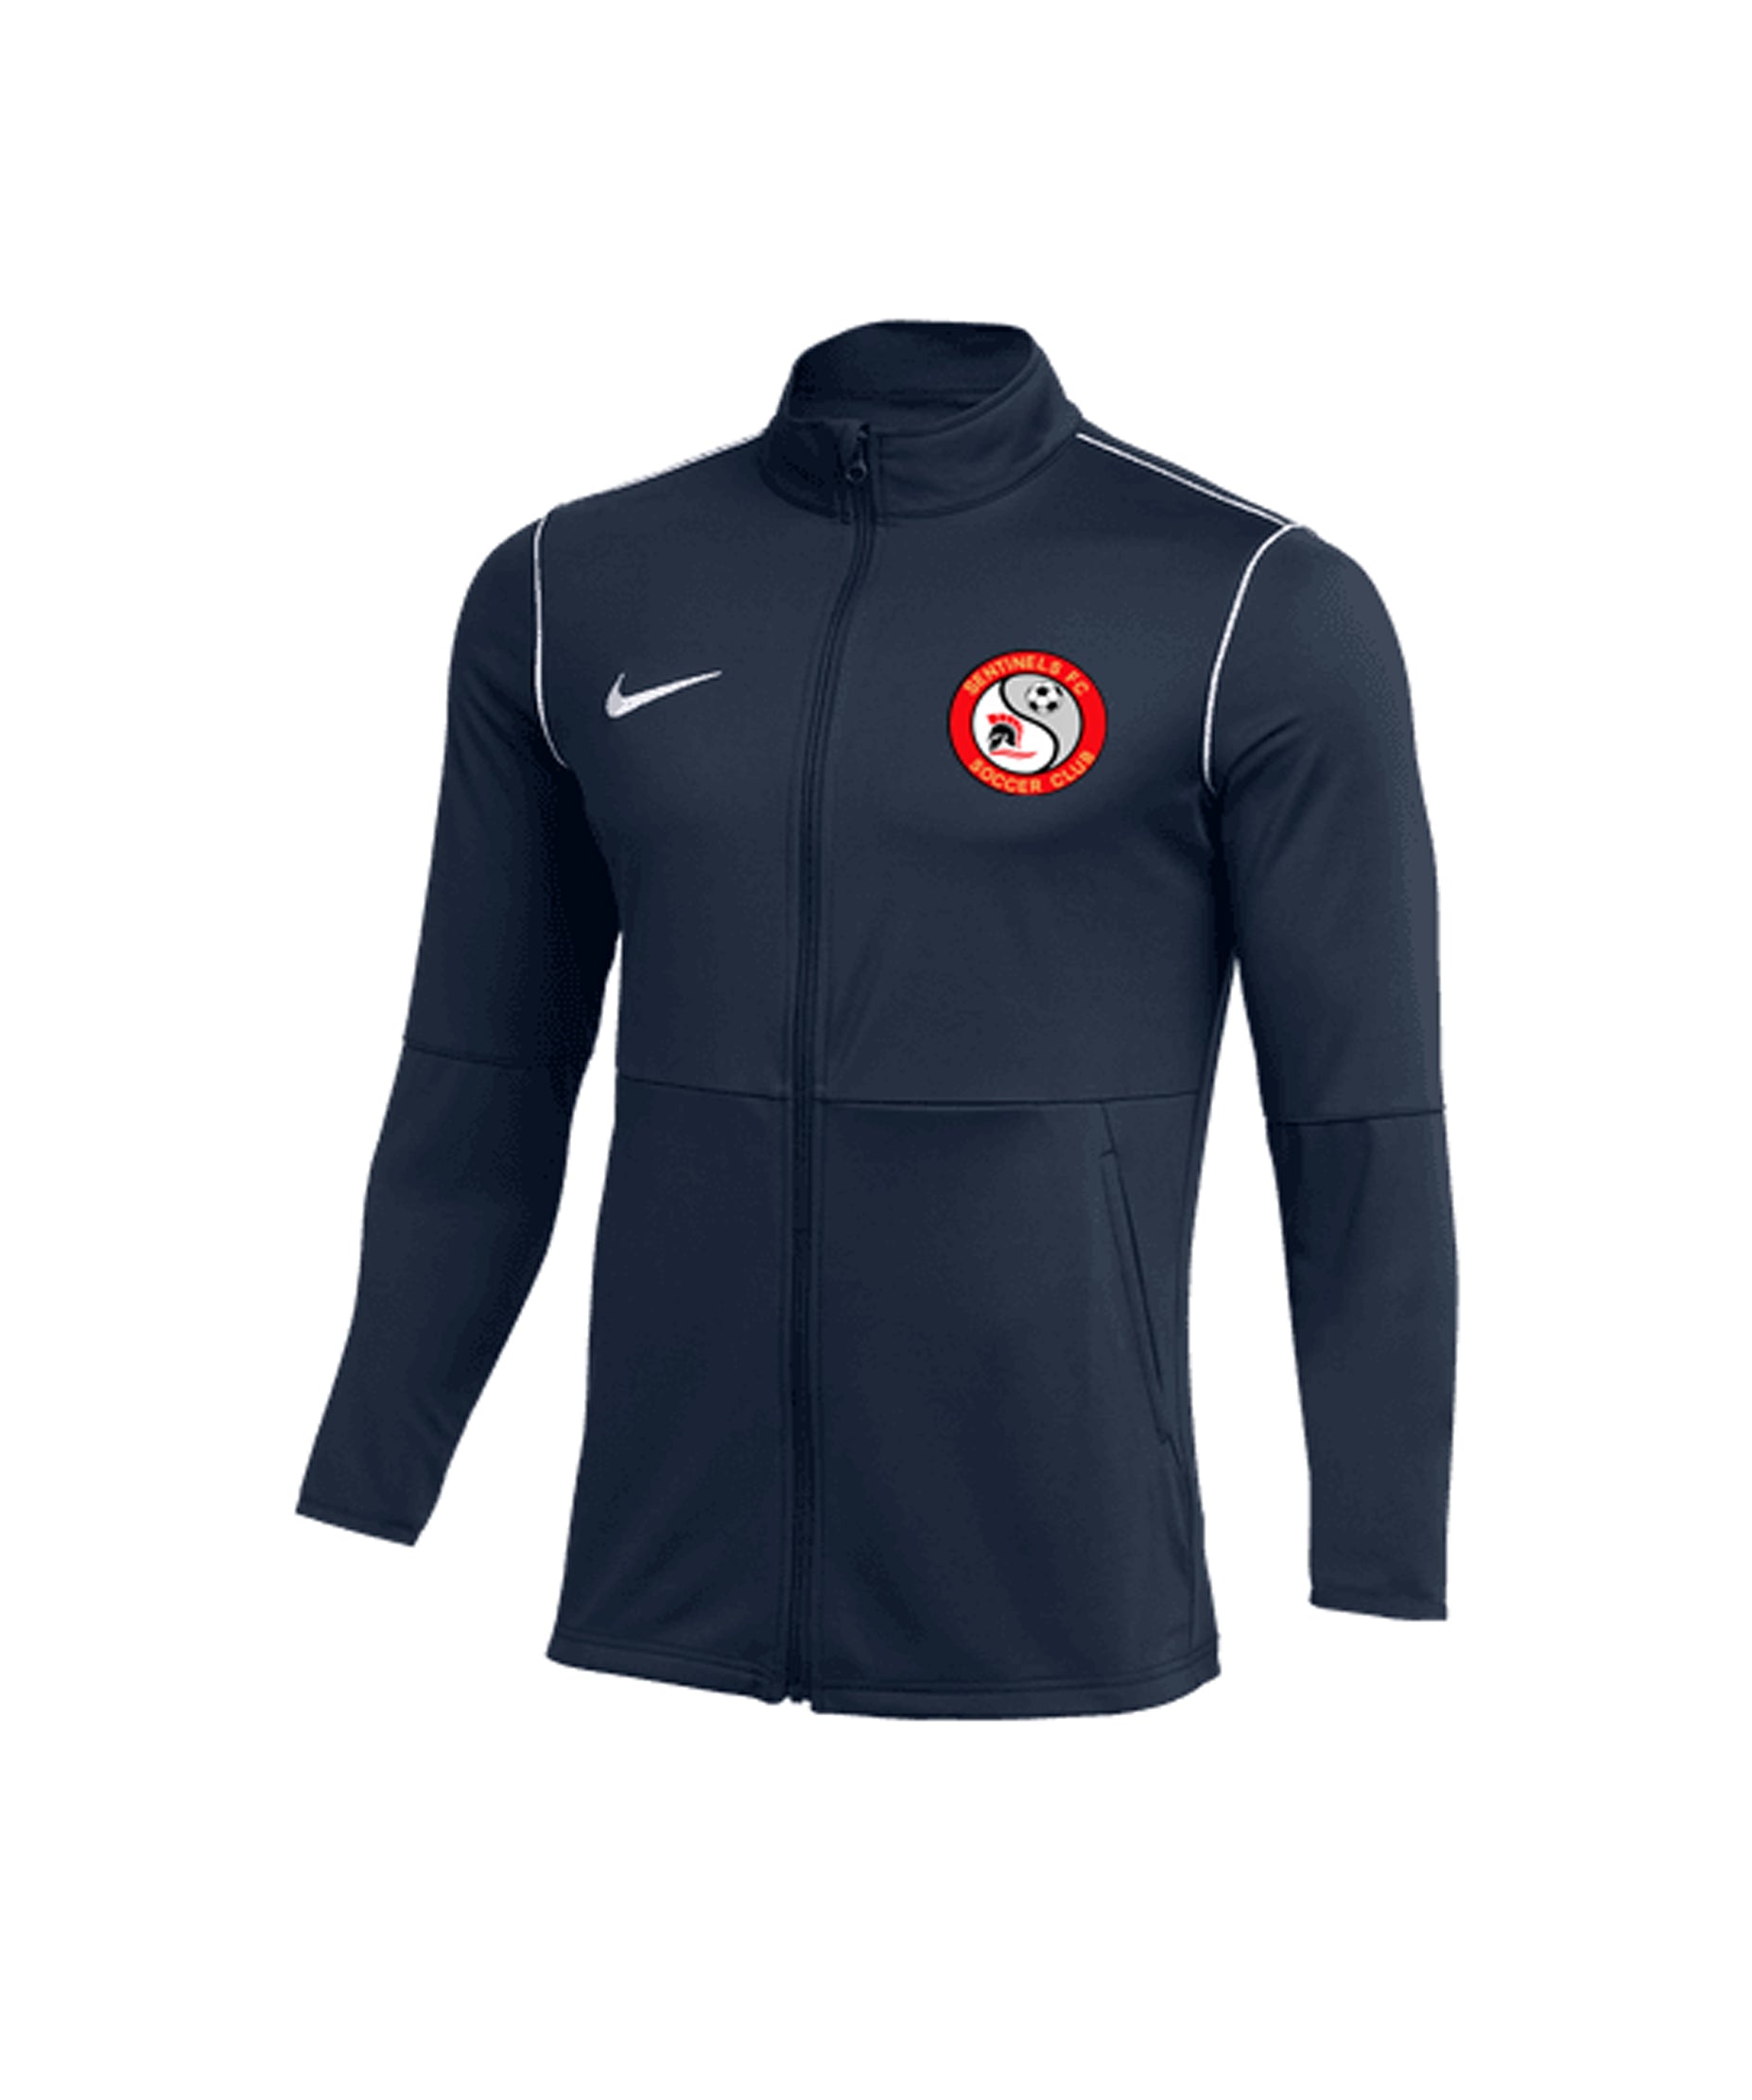 SENTINELS FC NIKE YOUTH AND ADULT WARM-UP JACKET - BLACK